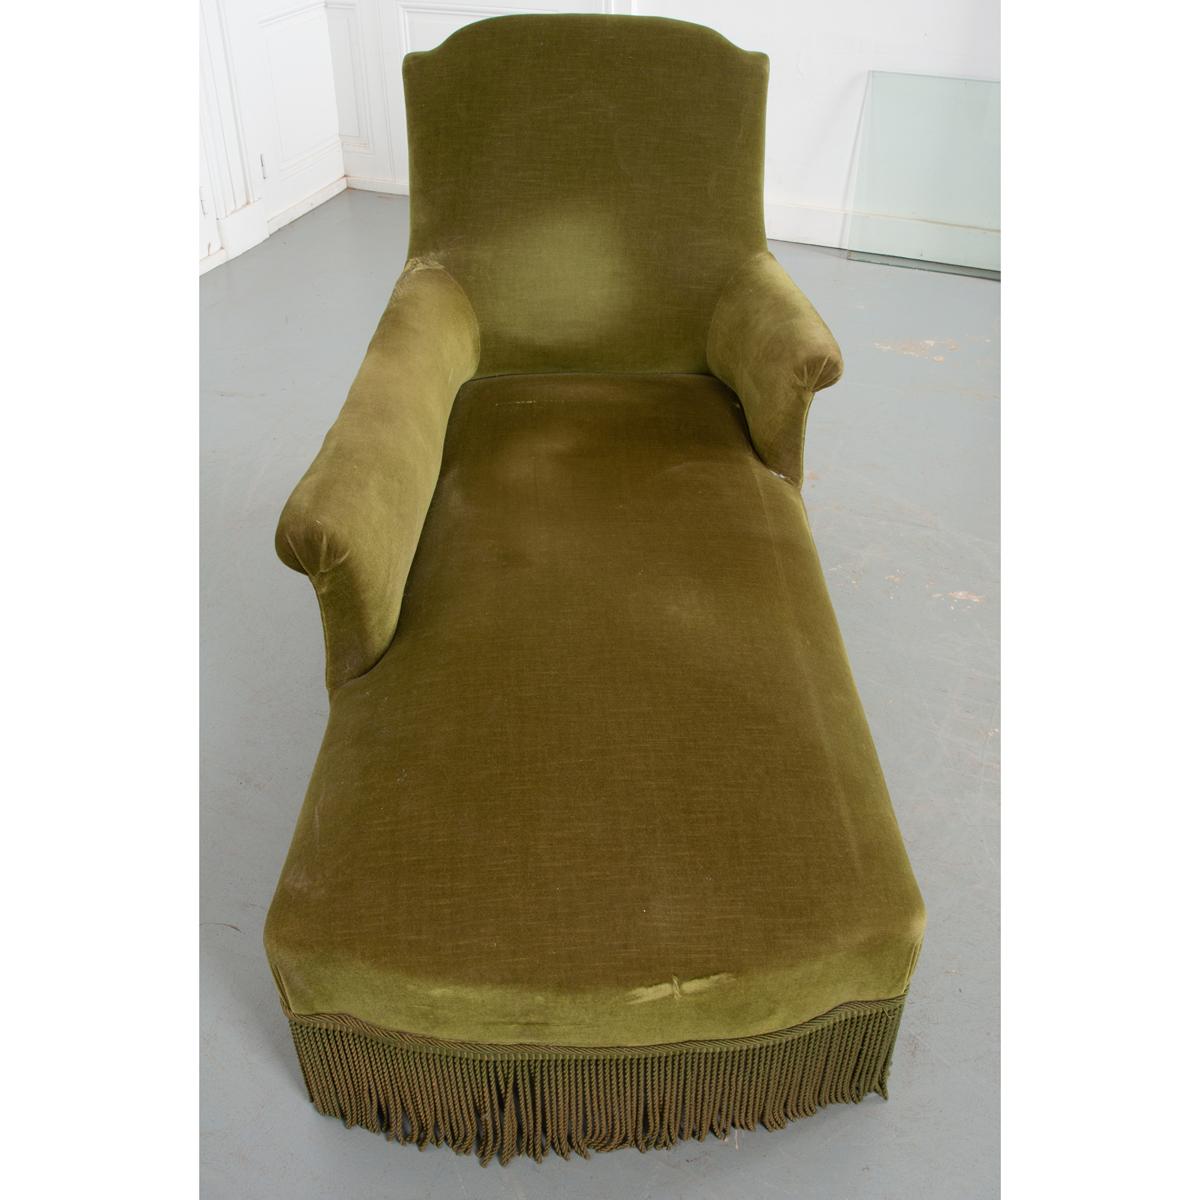 Other French Vintage Chaise with Fringe 